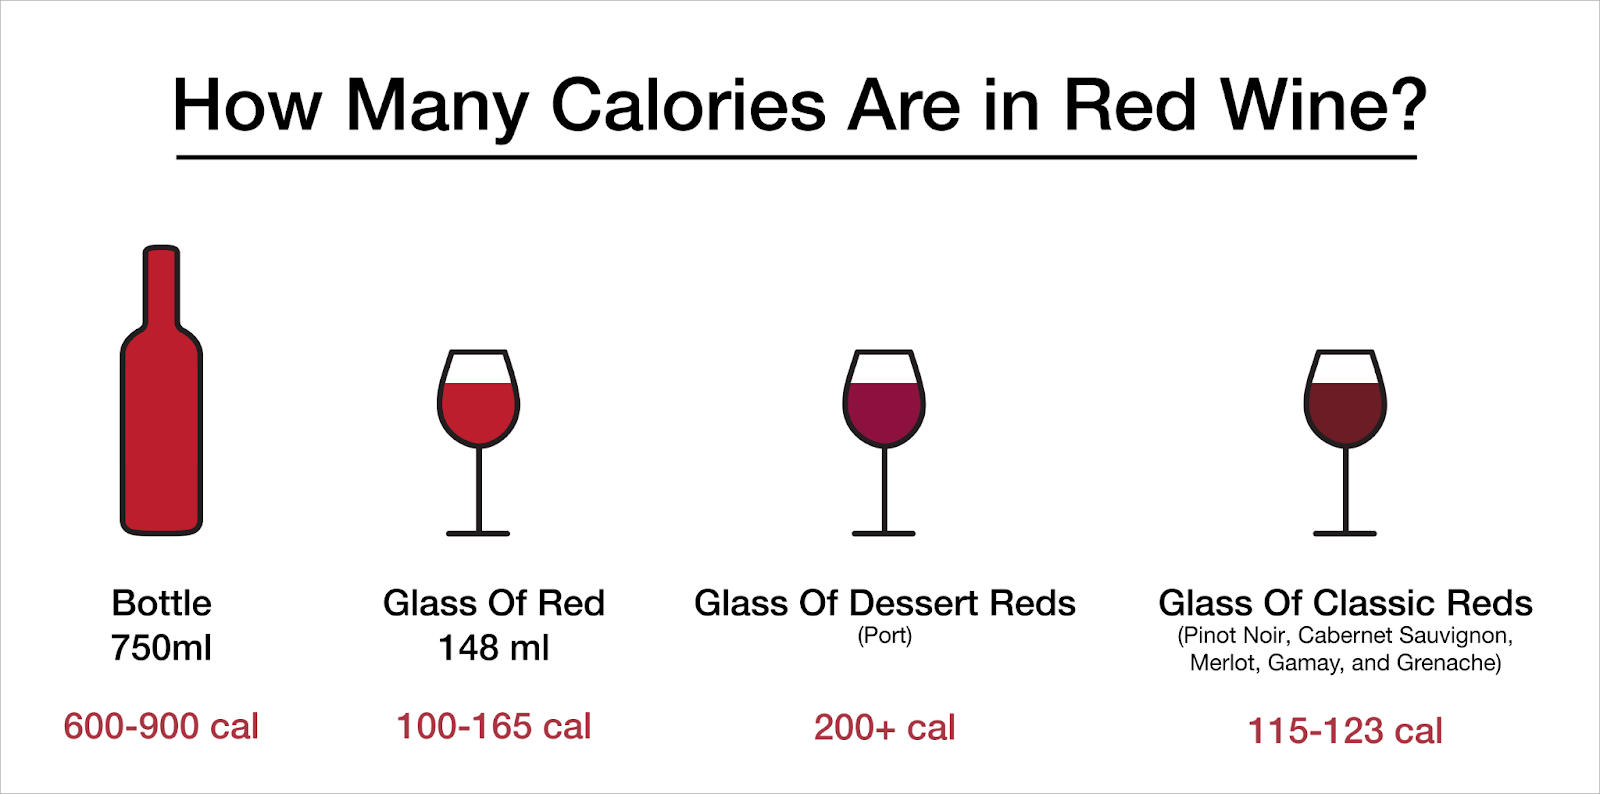 reb Genoplive Banke How Many Calories in a Glass of Red Wine? | Macy's Wine Shop